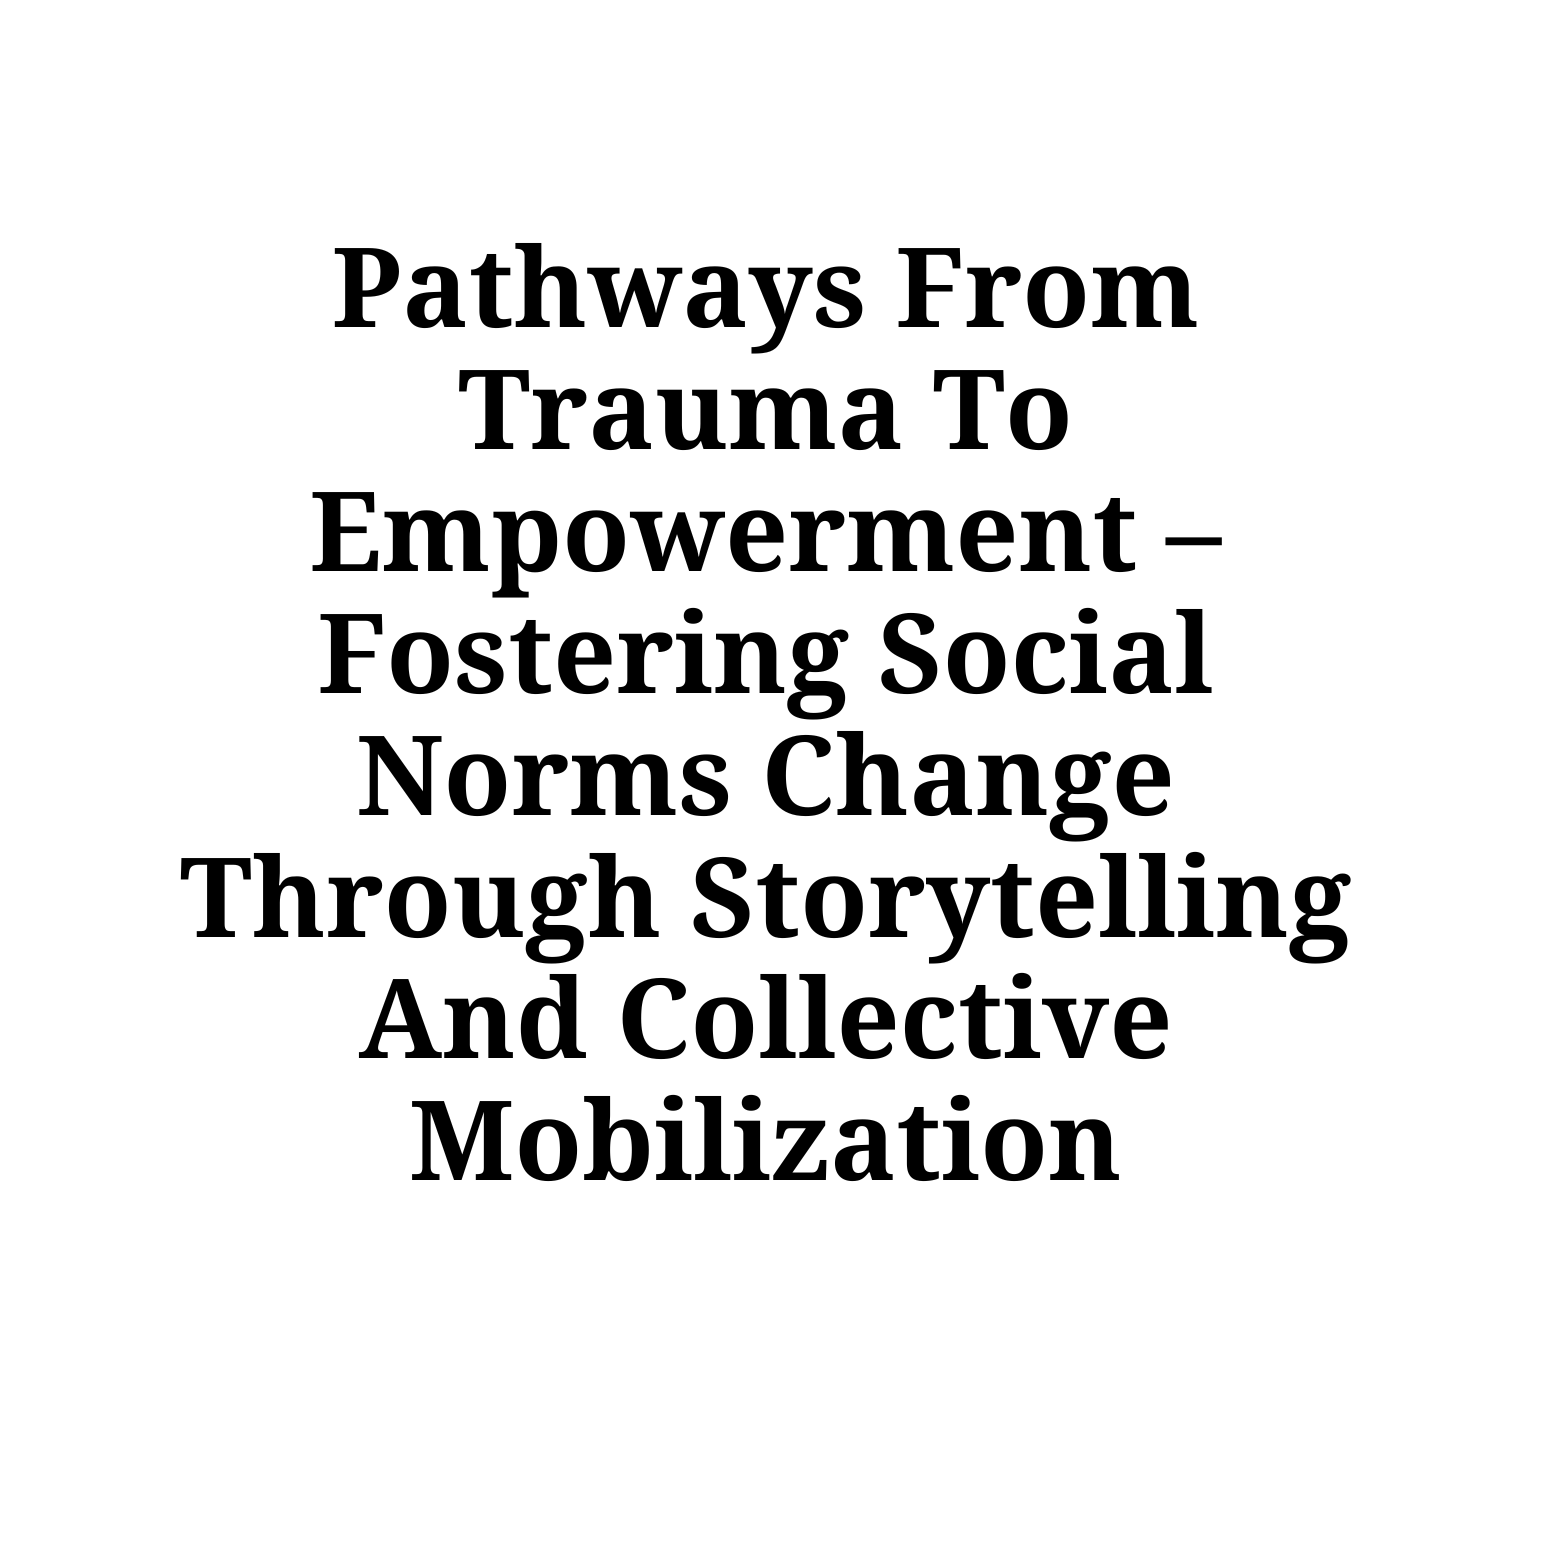 Pathways from trauma to empowerment – fostering social norms change  through storytelling and collective mobilization